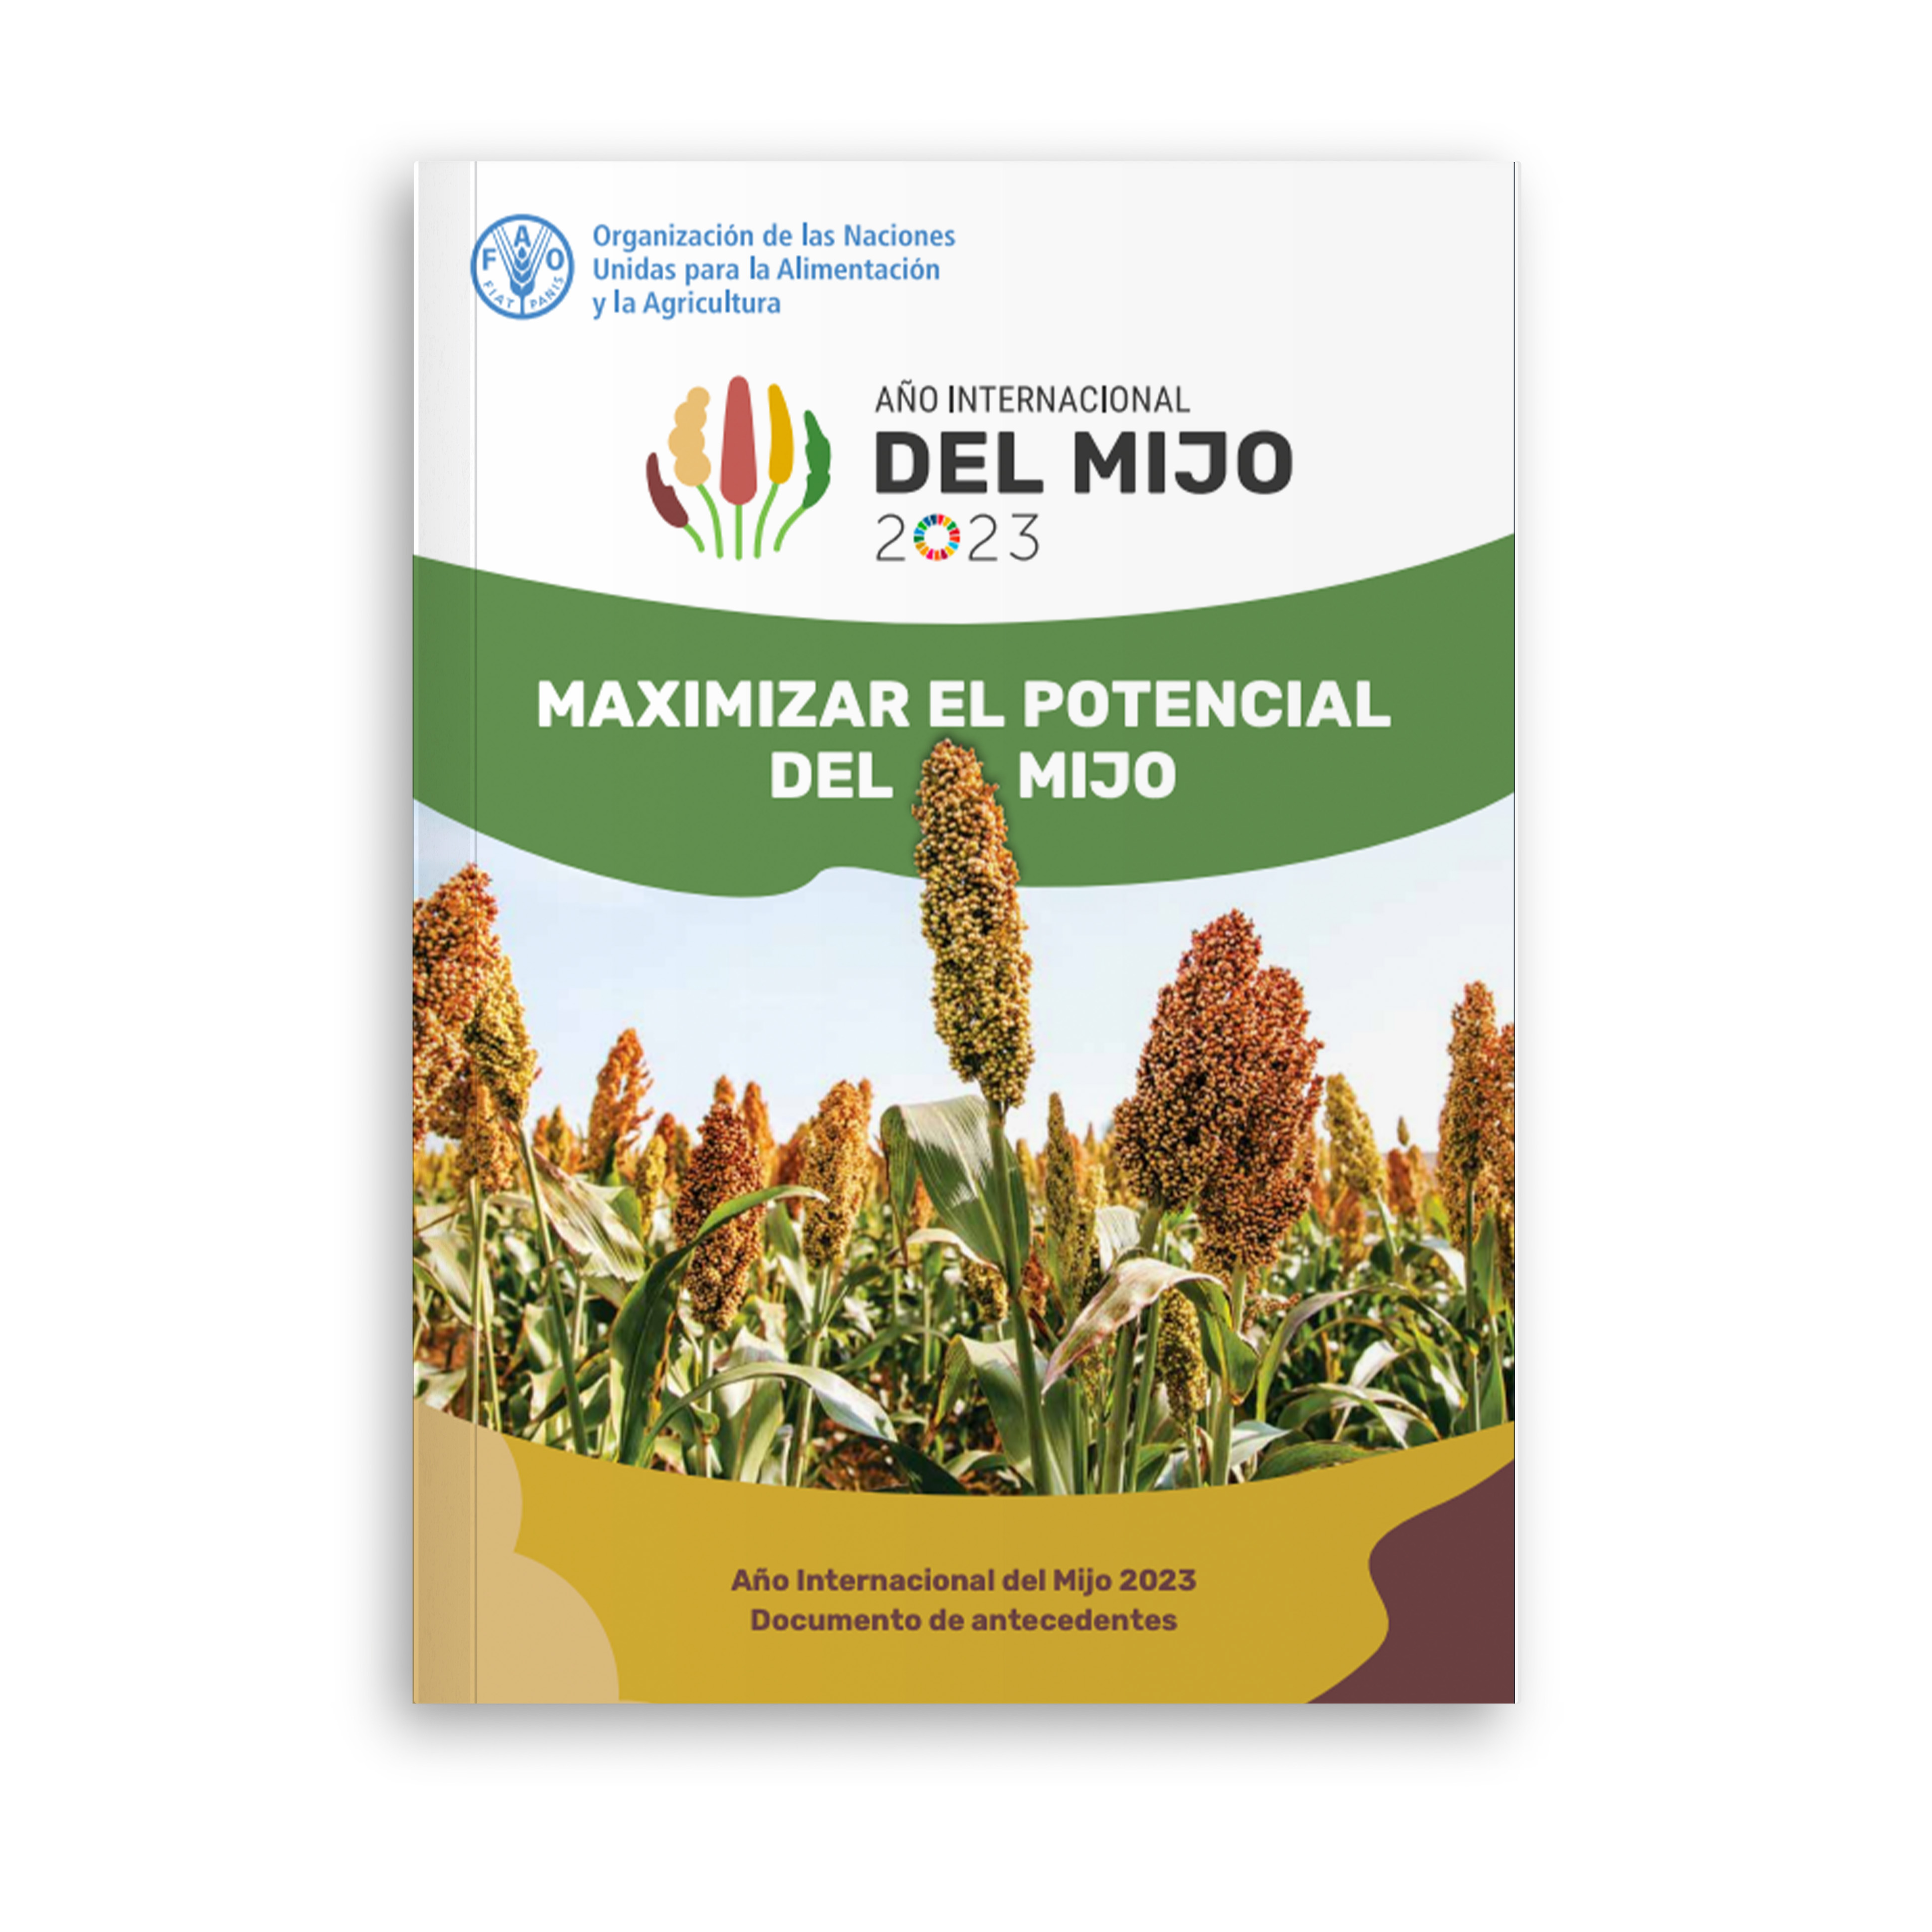 Unleashing the potential of millets - International year of millets 2023 Background paper